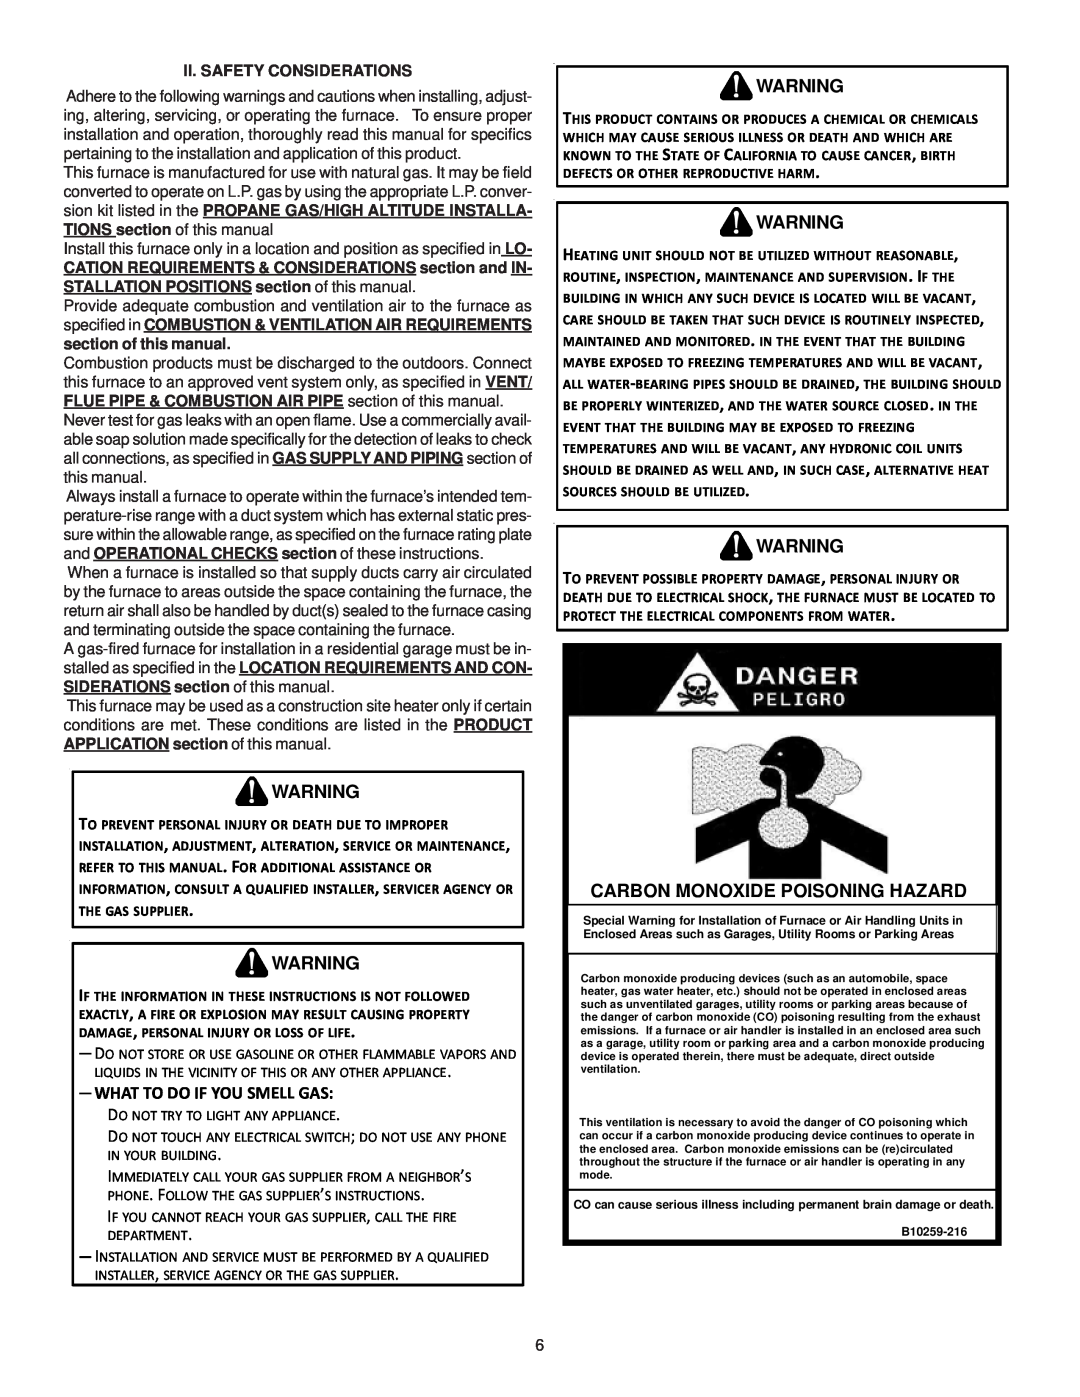 Goodman Mfg MH95/ACSH96/AMEH96/ GCH95/GME95/GCH9 Carbon Monoxide Poisoning Hazard, What To Do If You Smell Gas 